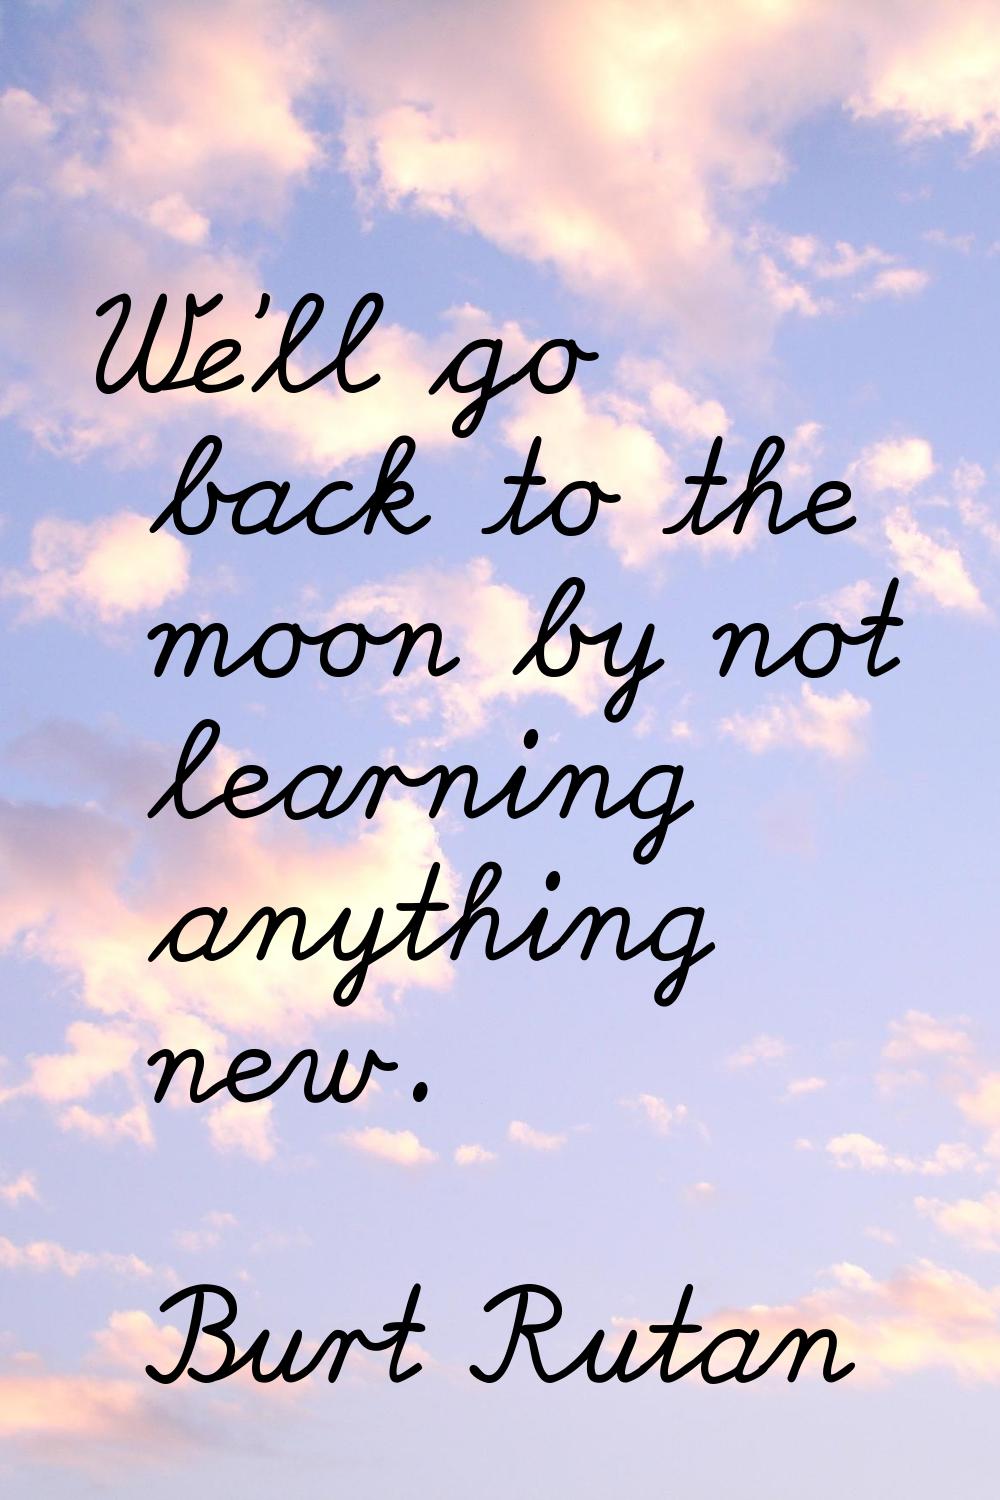 We'll go back to the moon by not learning anything new.